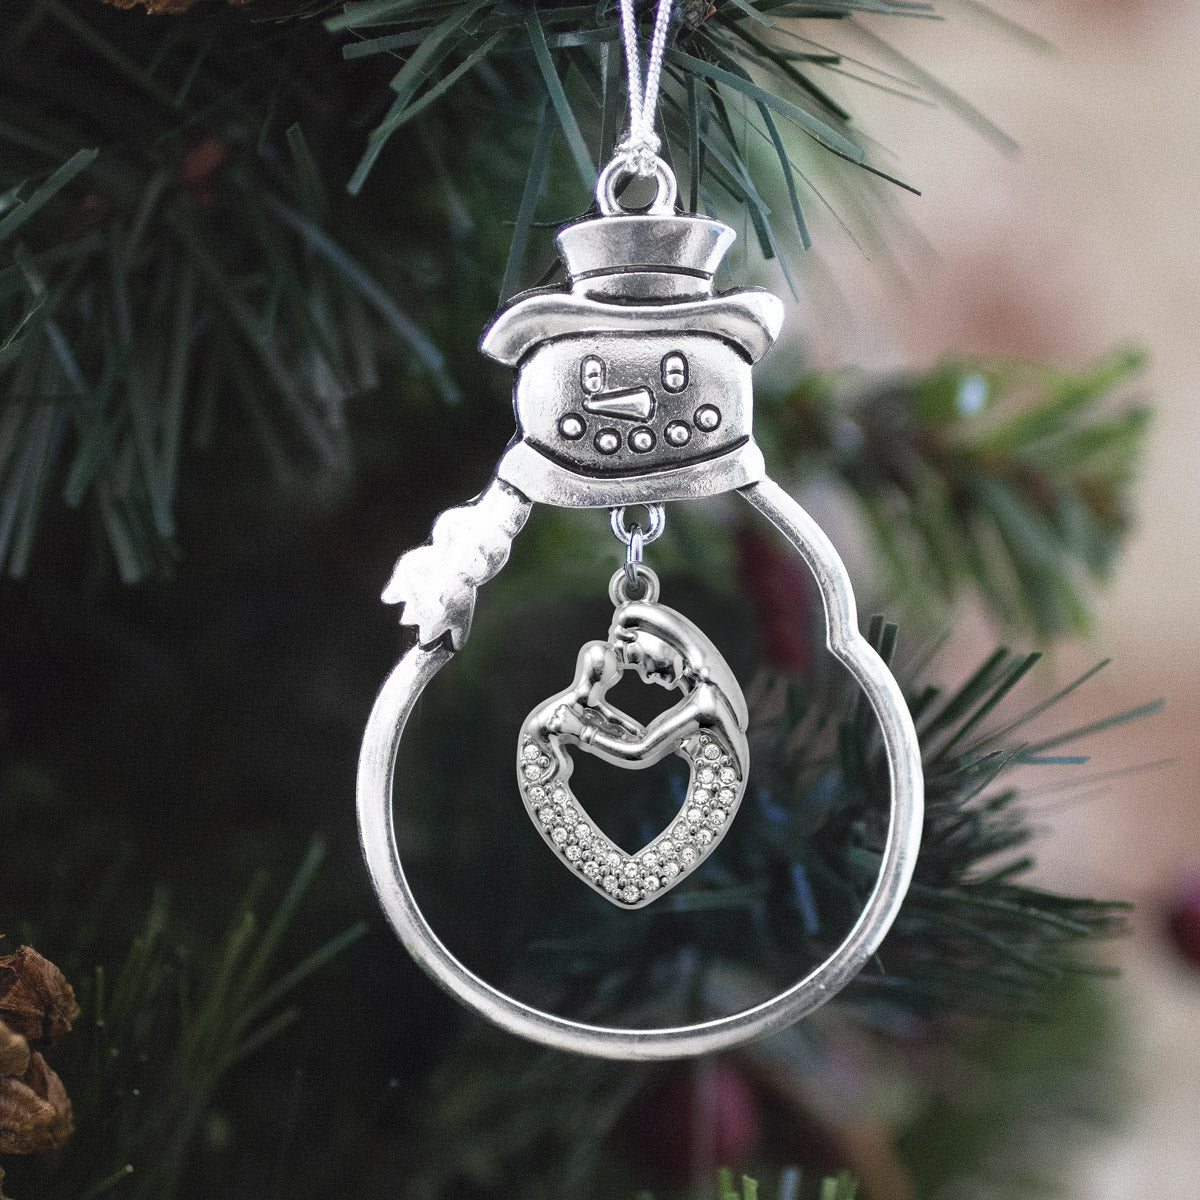 Silver Mother and Child Charm Snowman Ornament